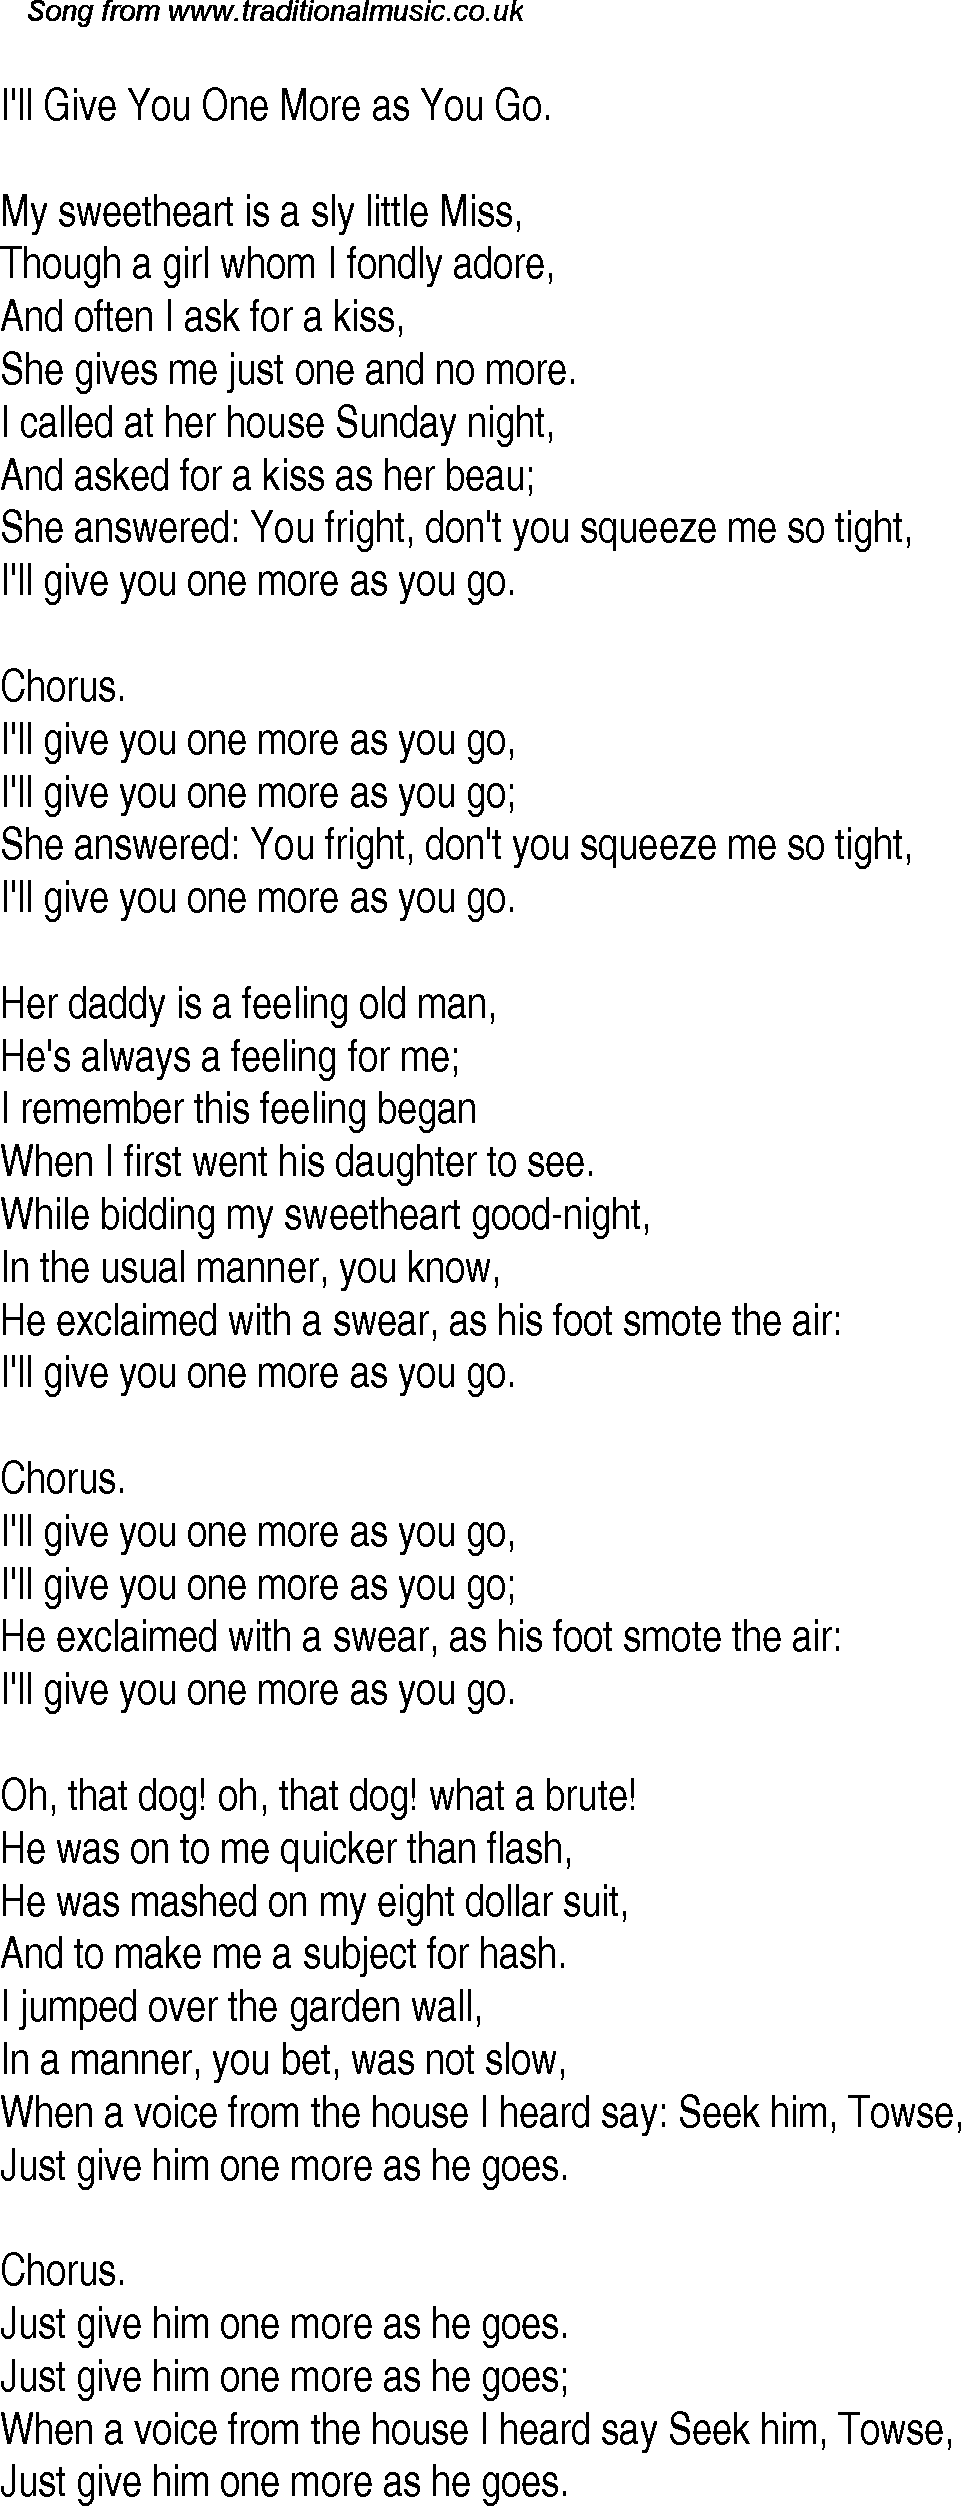 Old Time Song Lyrics For 17 I Ll Give You One More As You Go